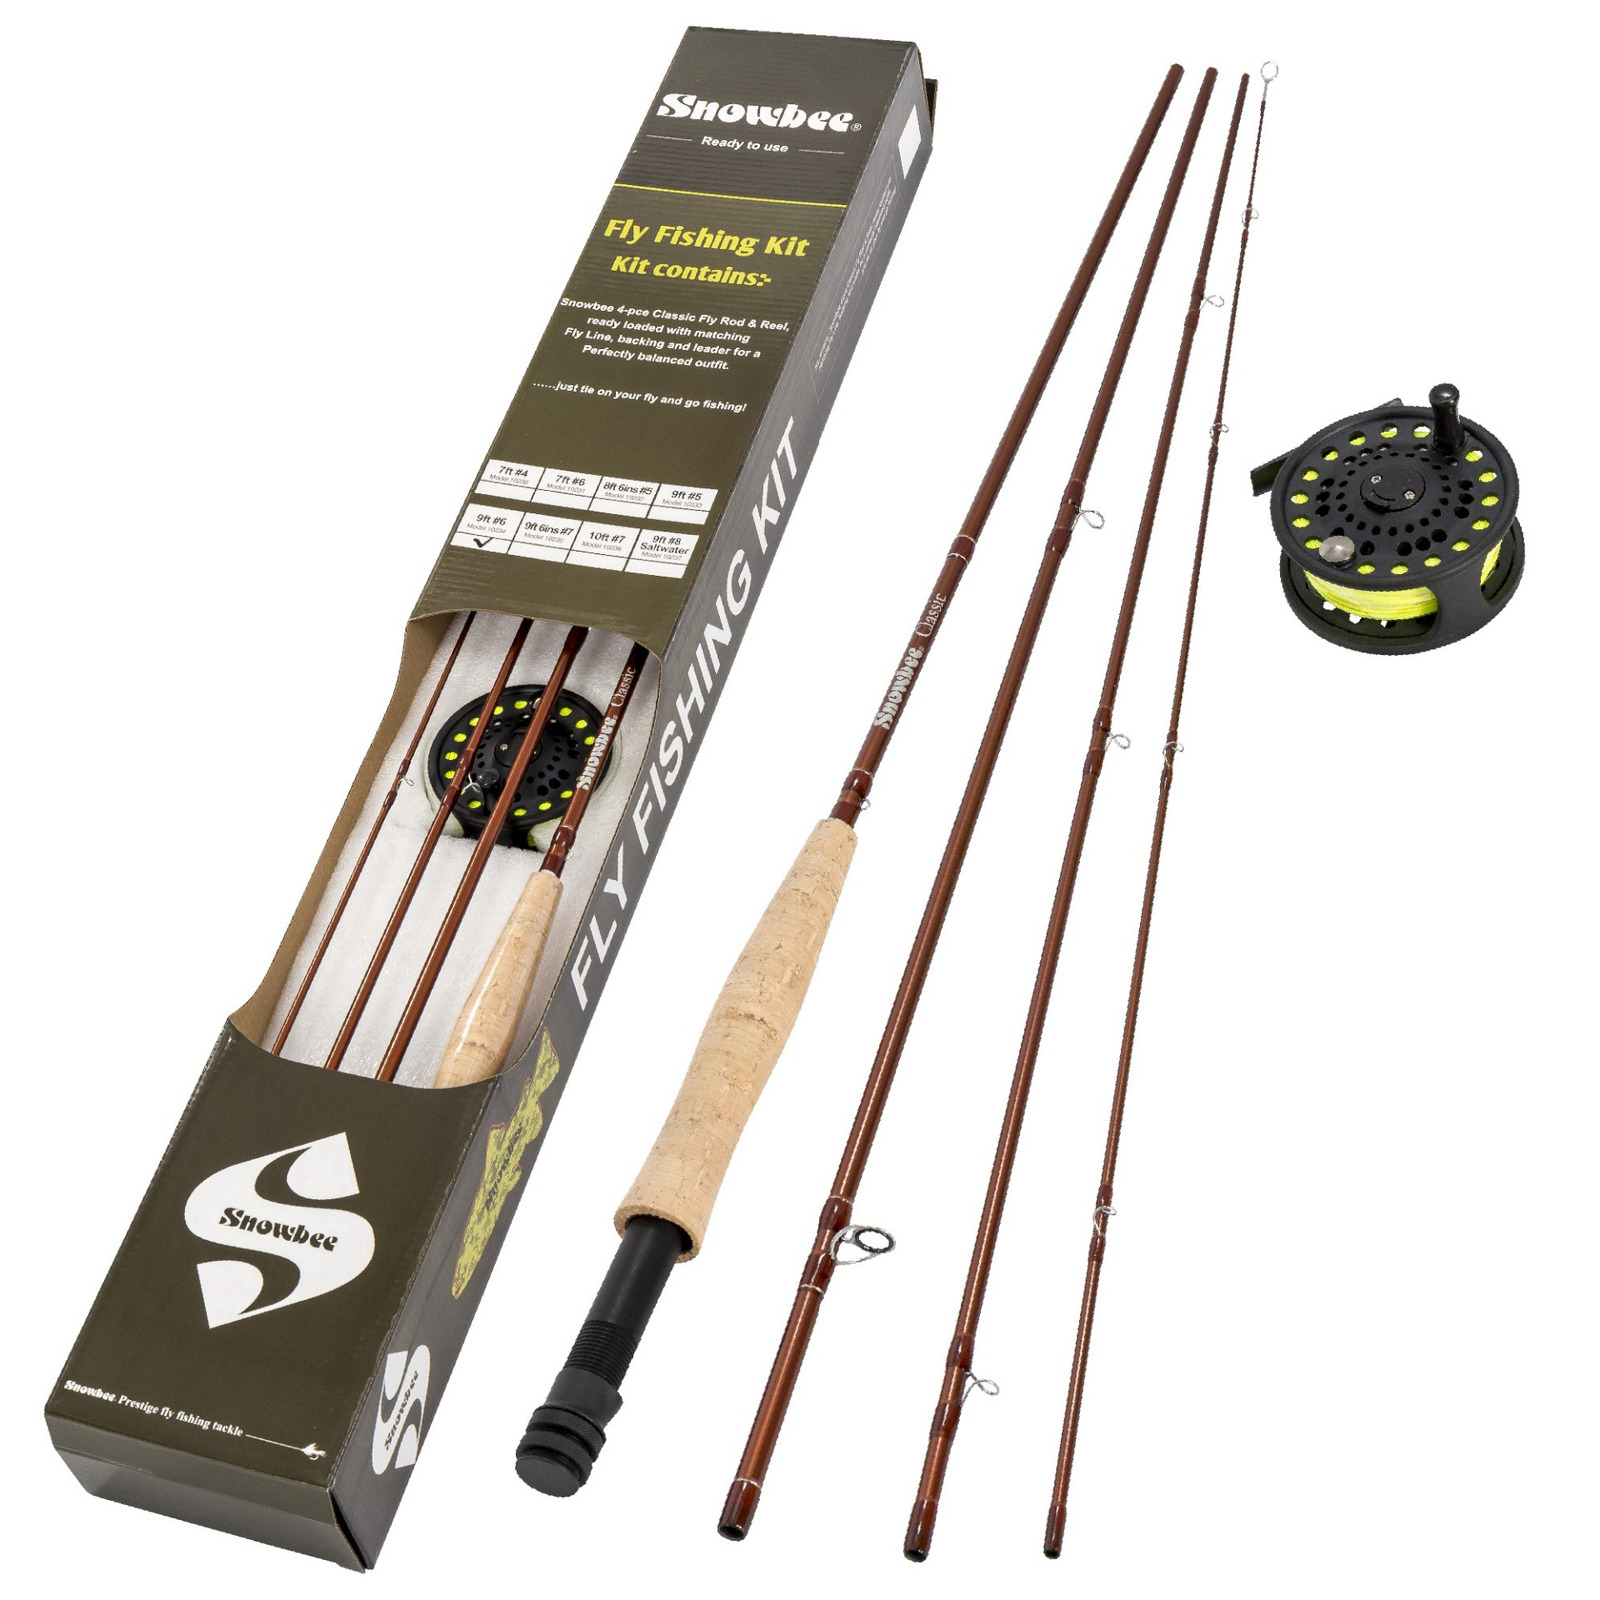 Snowbee 9' Classic Fly Fishing Rod And Reel Combo Kit 4pc - Choose Weight